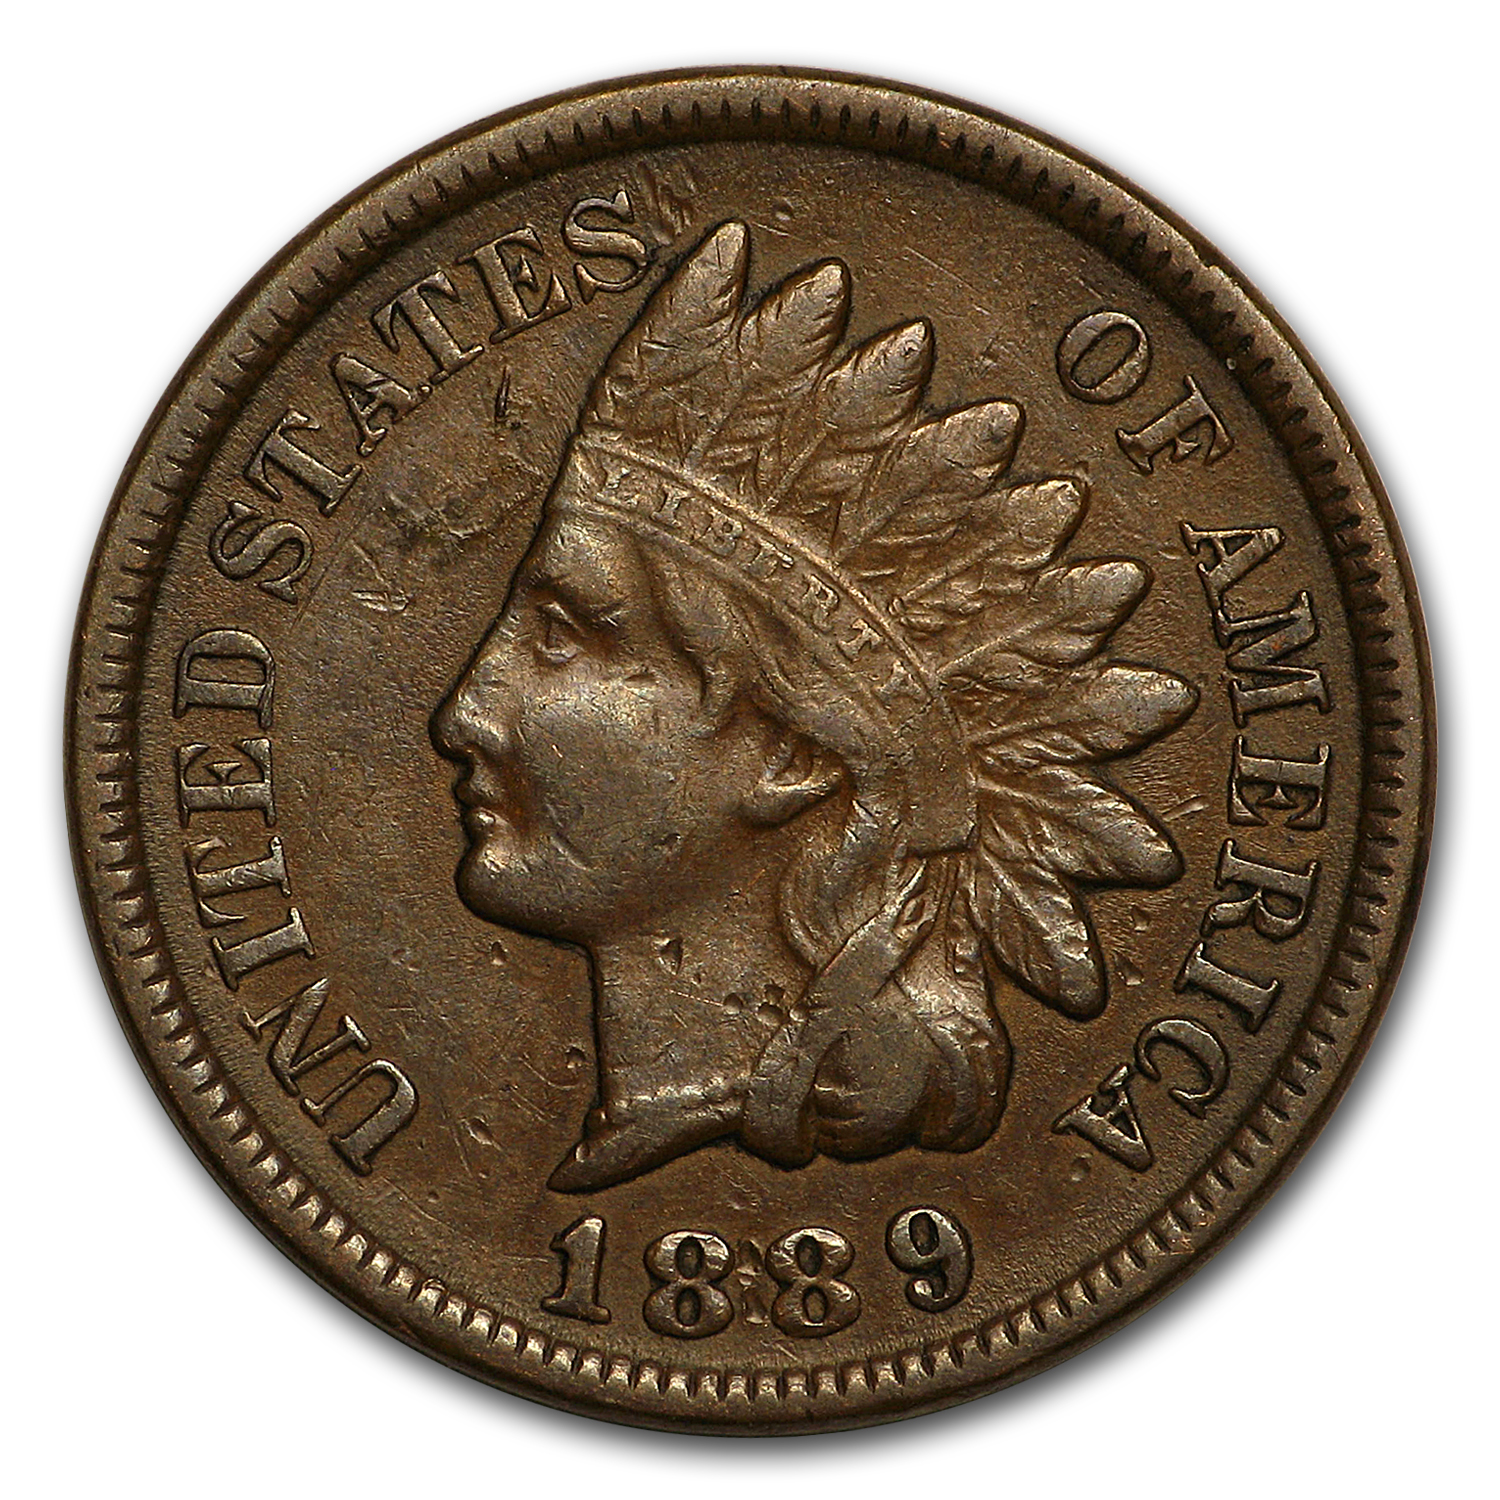 Buy 1889 Indian Head Cent XF